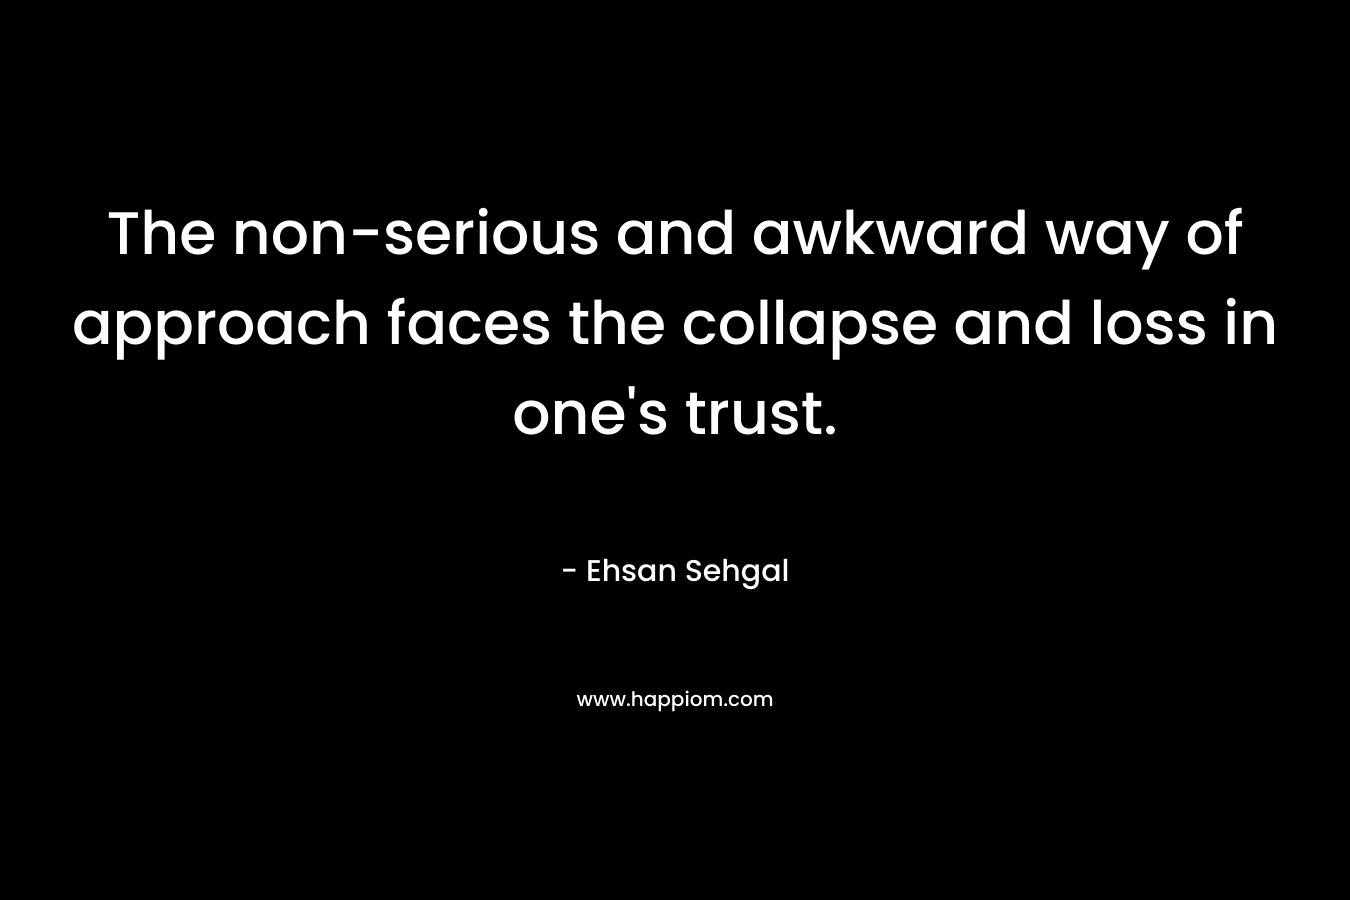 The non-serious and awkward way of approach faces the collapse and loss in one’s trust. – Ehsan Sehgal